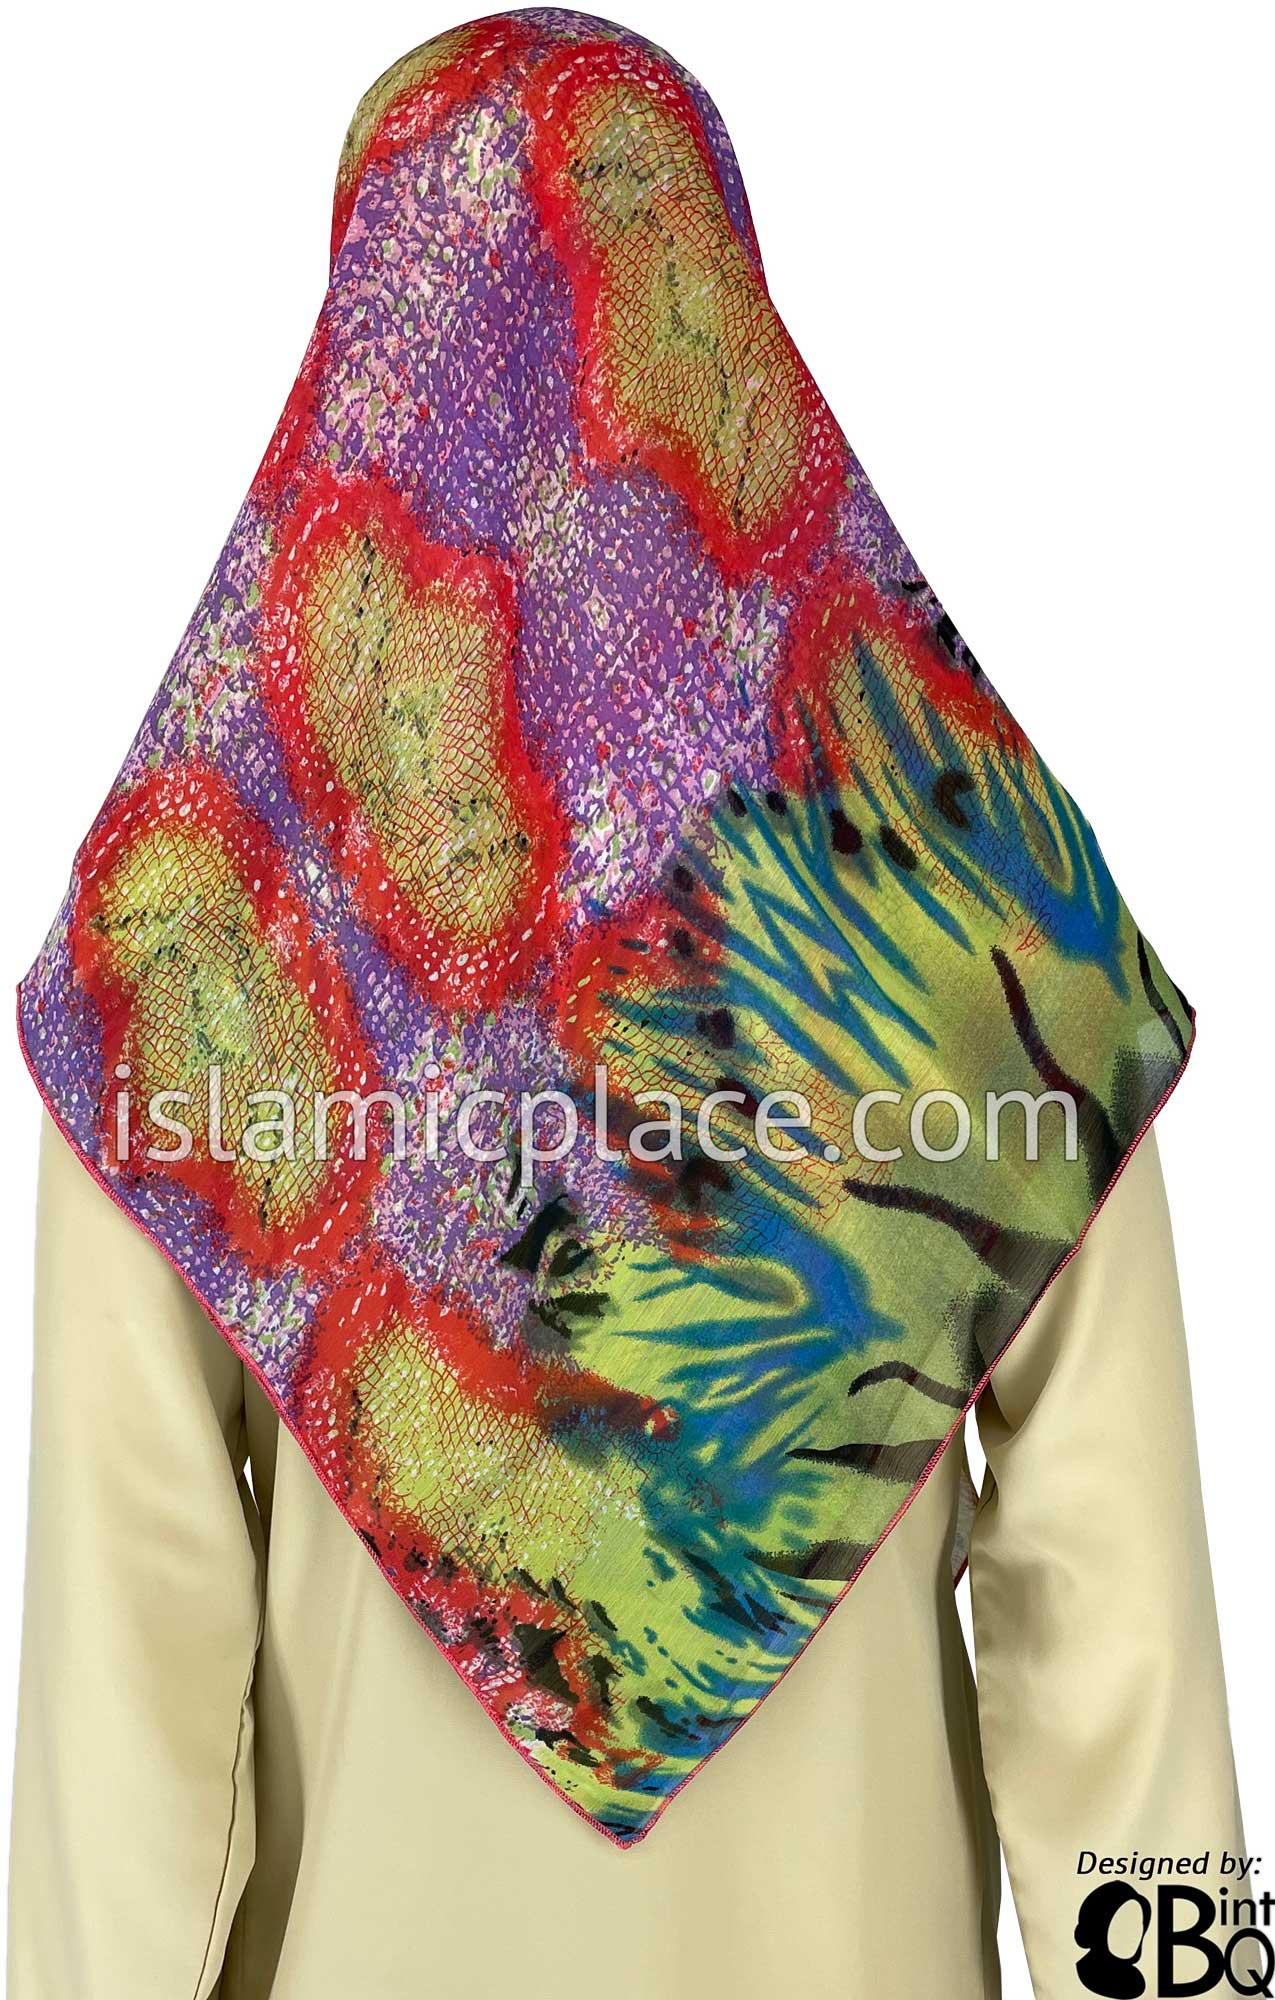 Red, Purple, Pear Green, Blue and Black Abstract Collage - 45" Square Printed Khimar